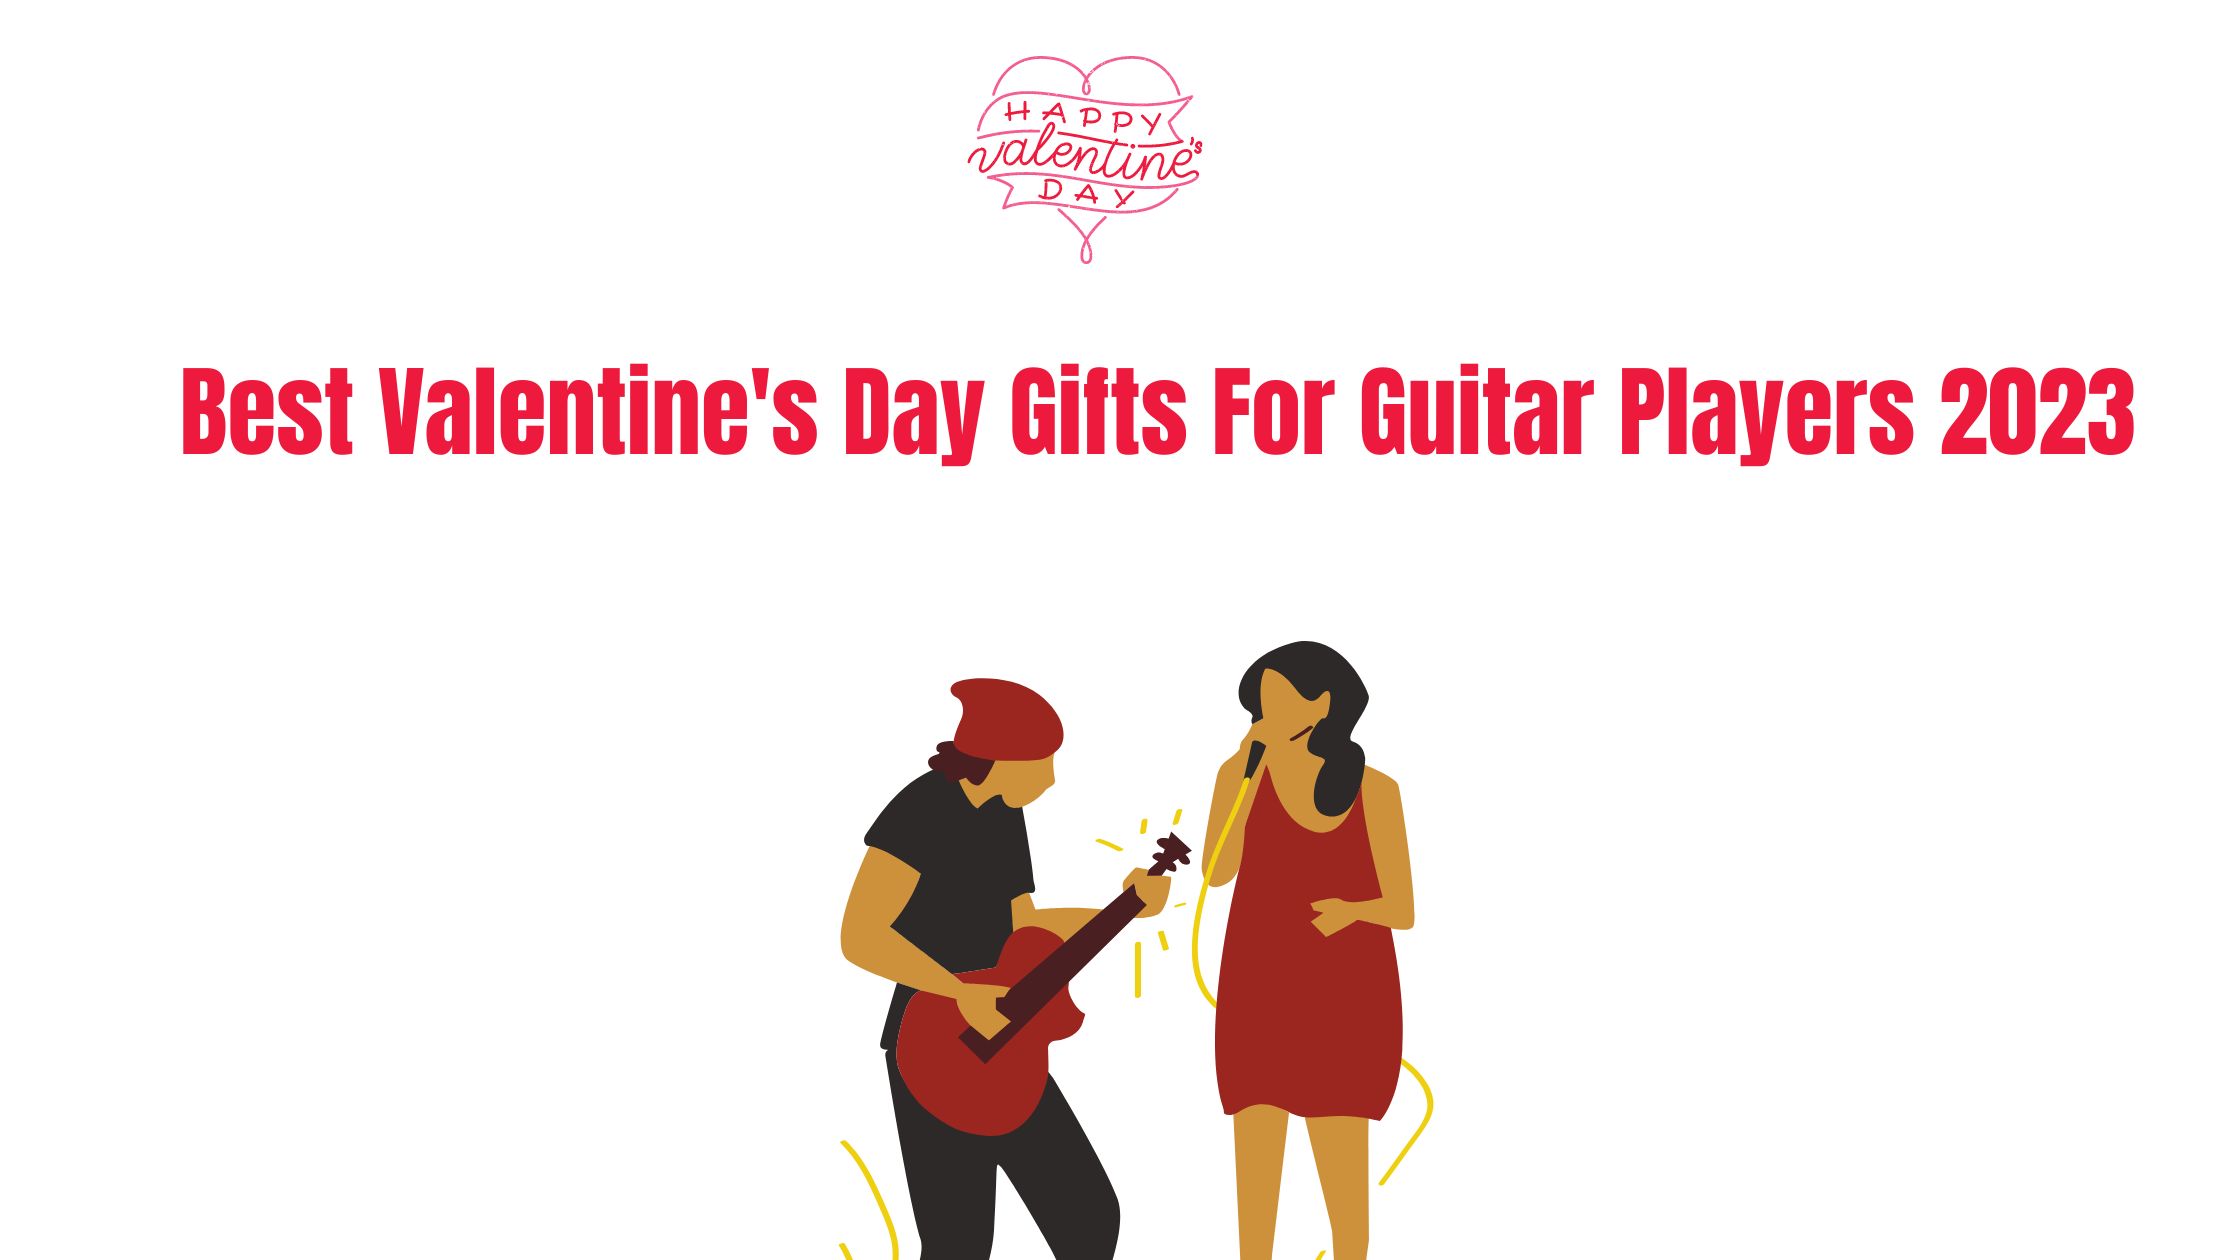 Best Valentine's Day Gifts For Guitar Players 2023